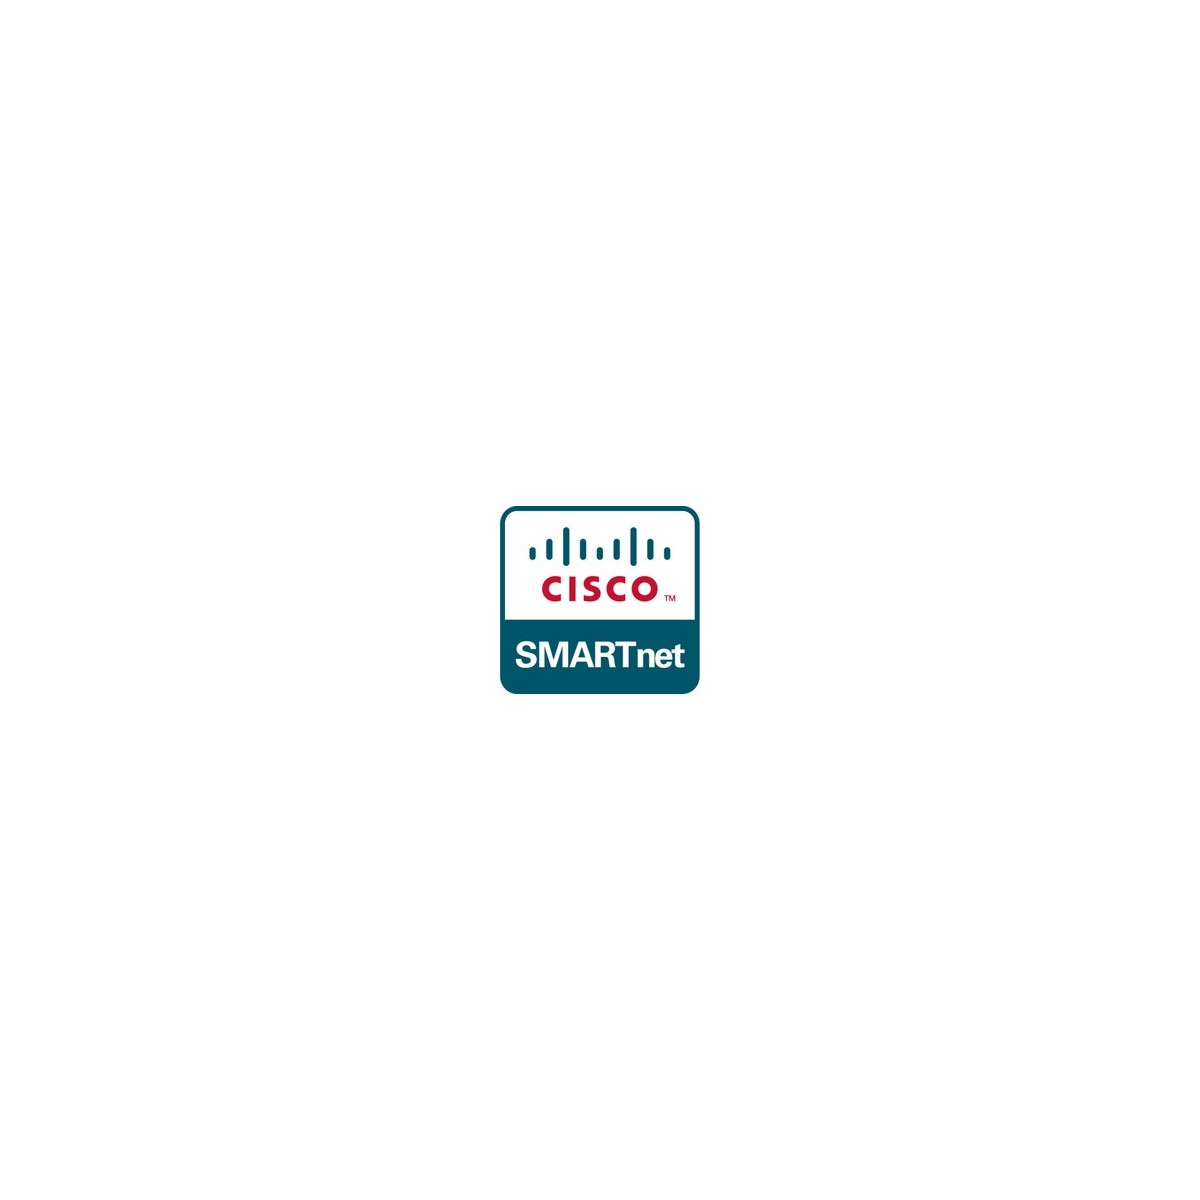 Cisco SMARTnet Total Care - 1 license(s) - 1 year(s) - On-site - 24x7